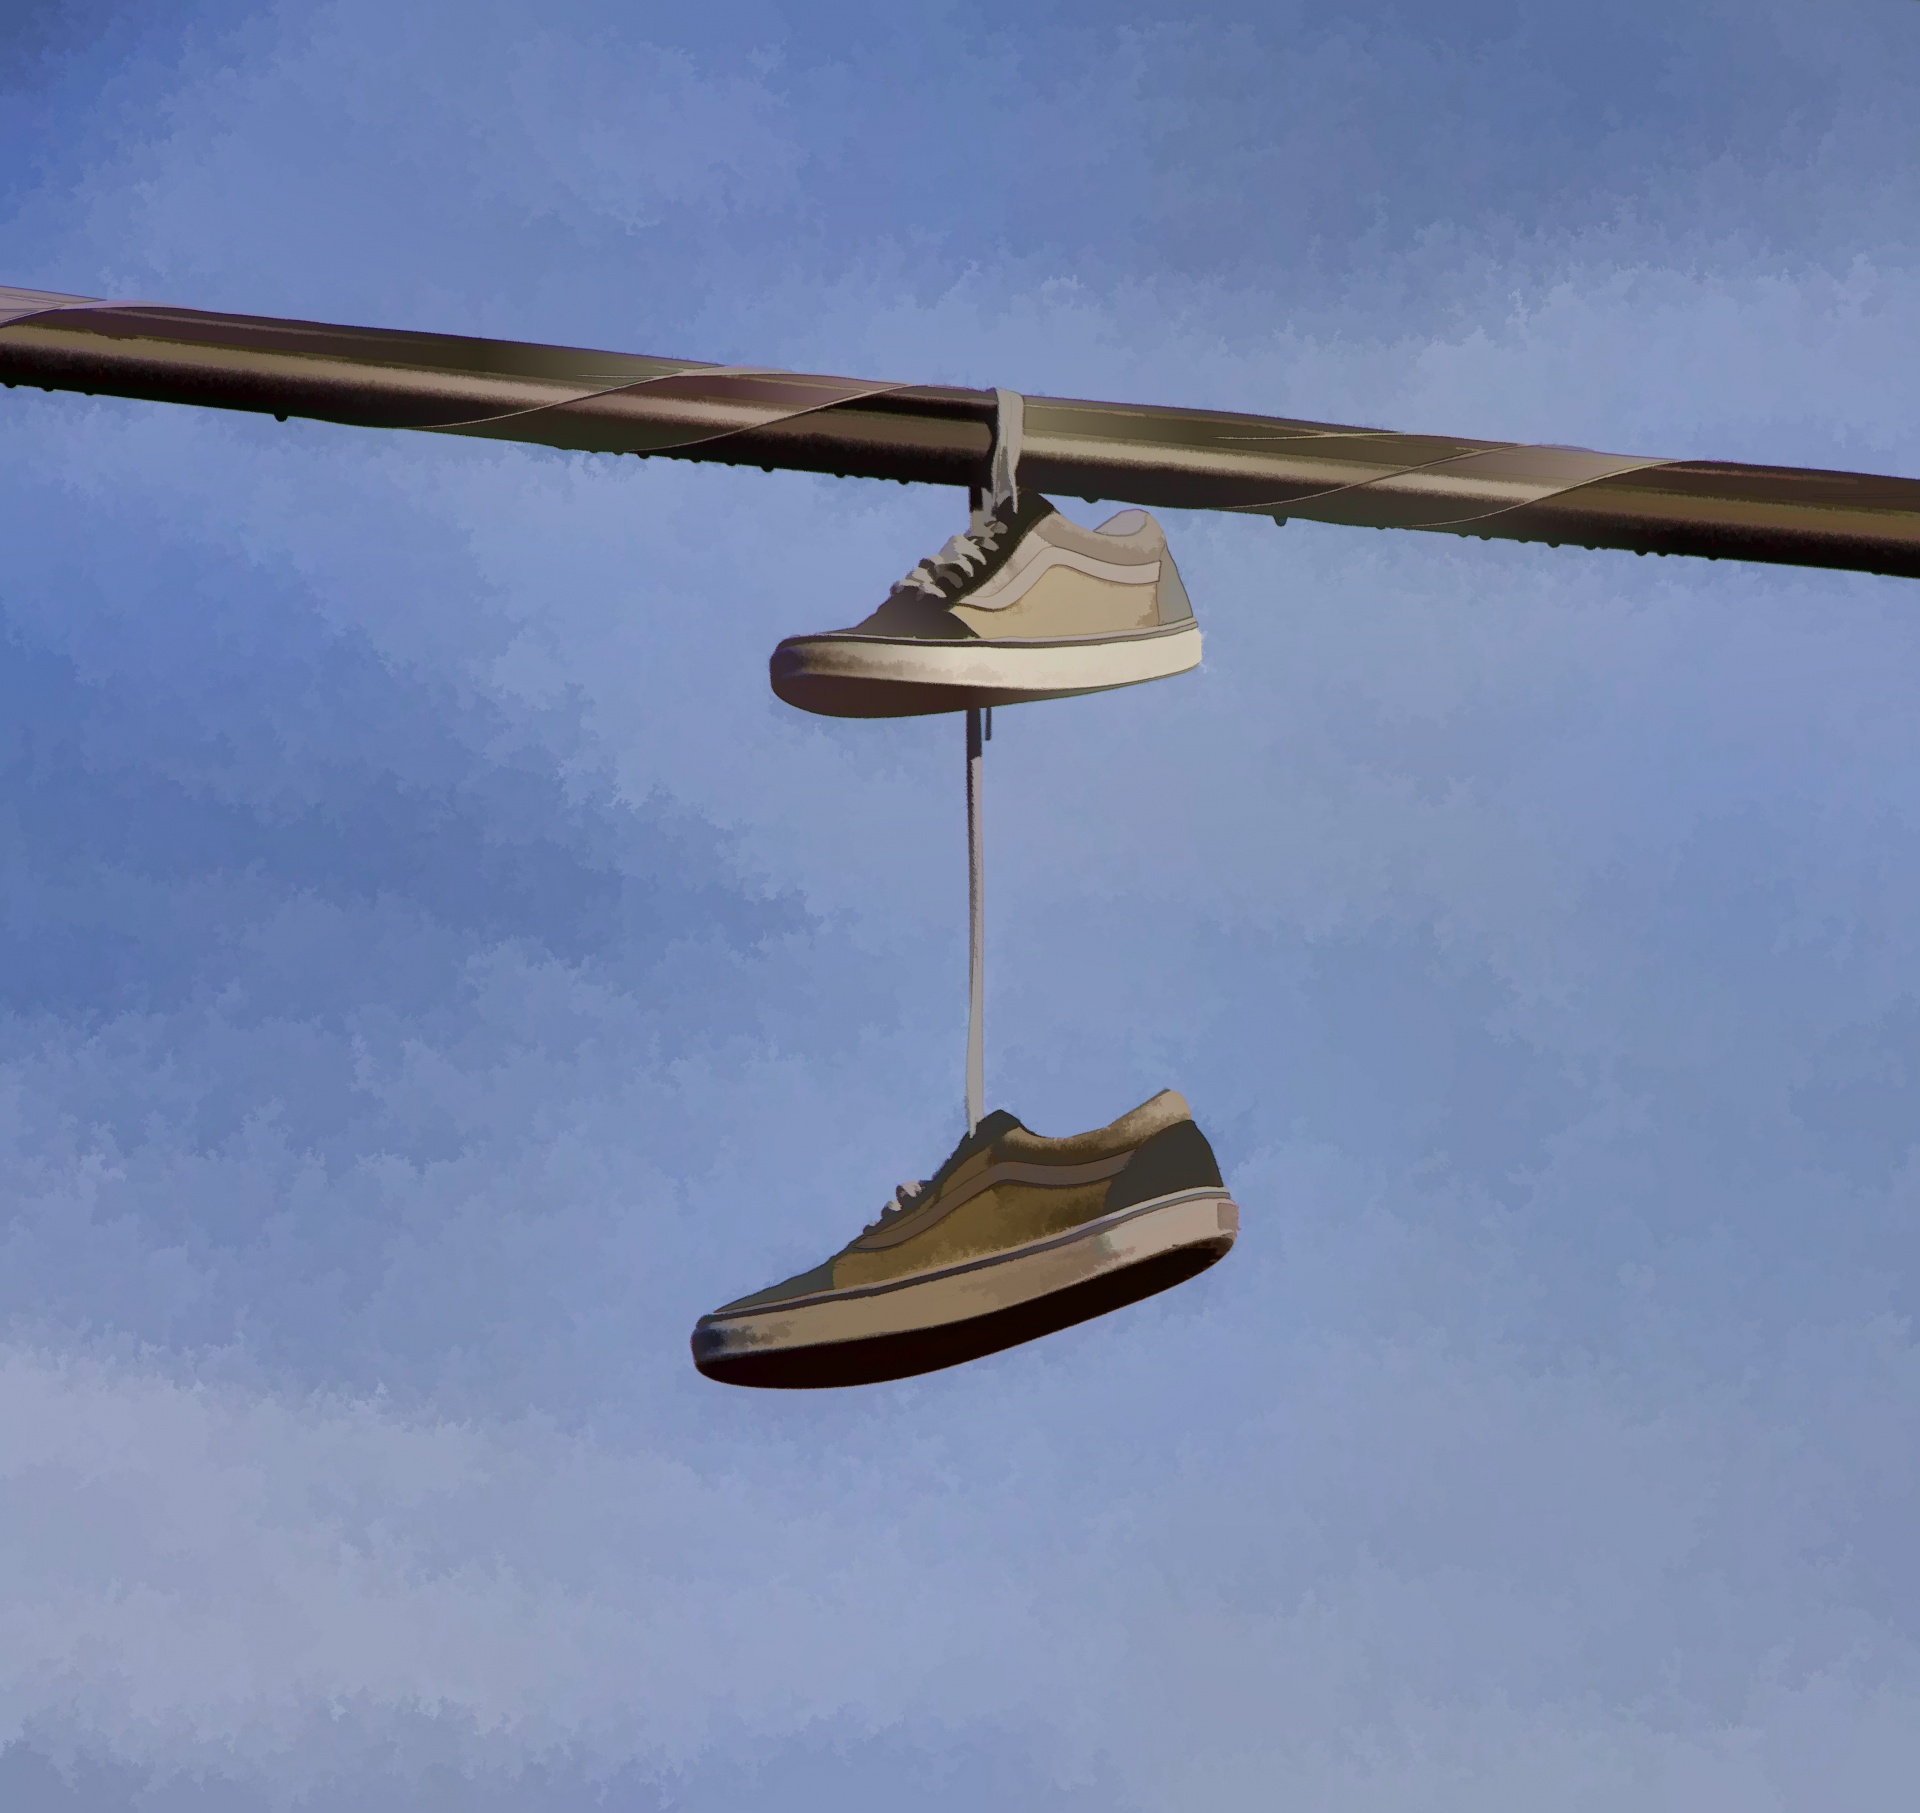 sneakers hanging on wire